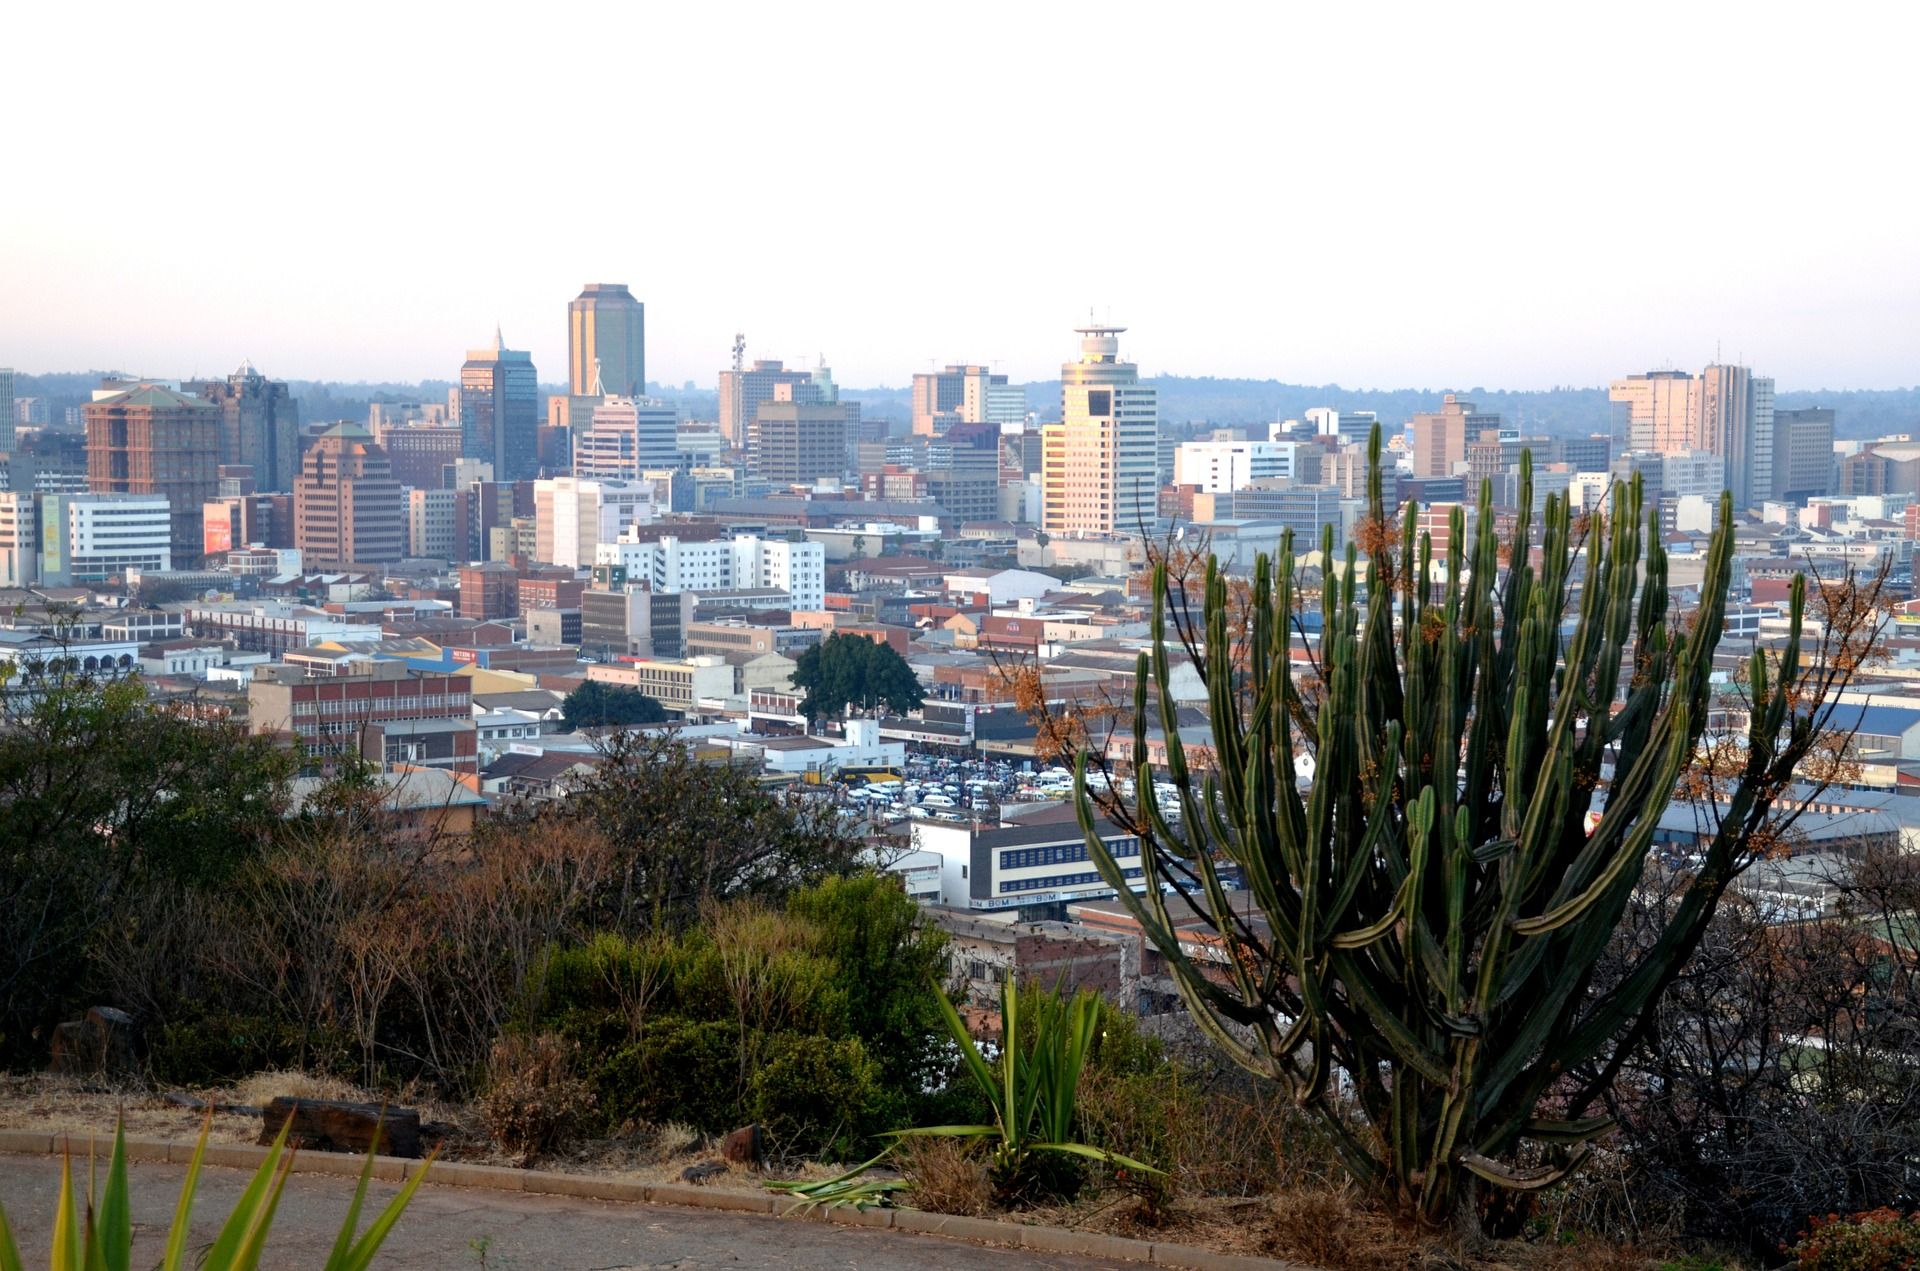 Harare Zimbabwe Harare is the largest city in Zimbabwe. Best cities, Harare, Victoria falls